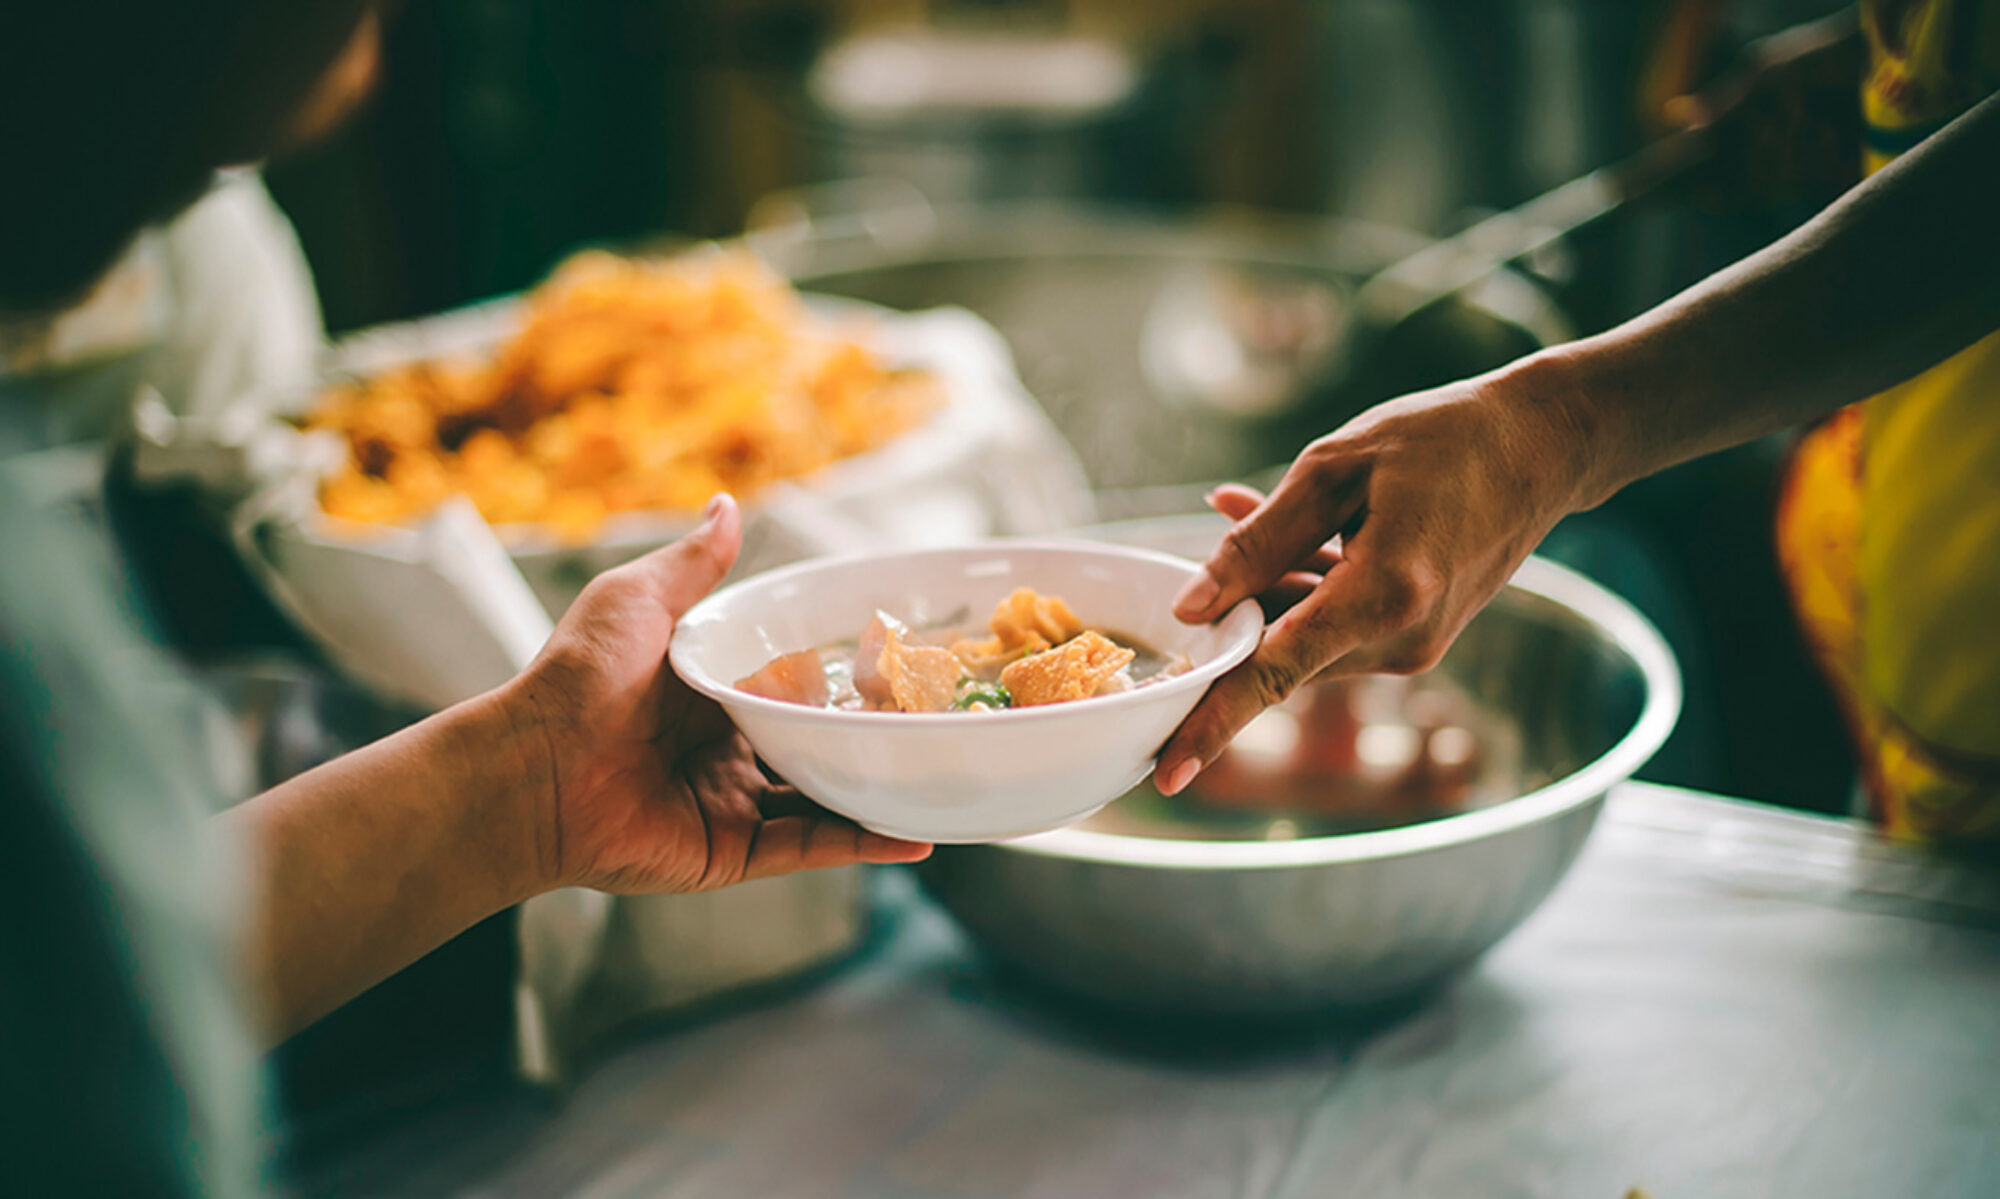 A photo of a person handing a bowl of food to another person. There is food in the background